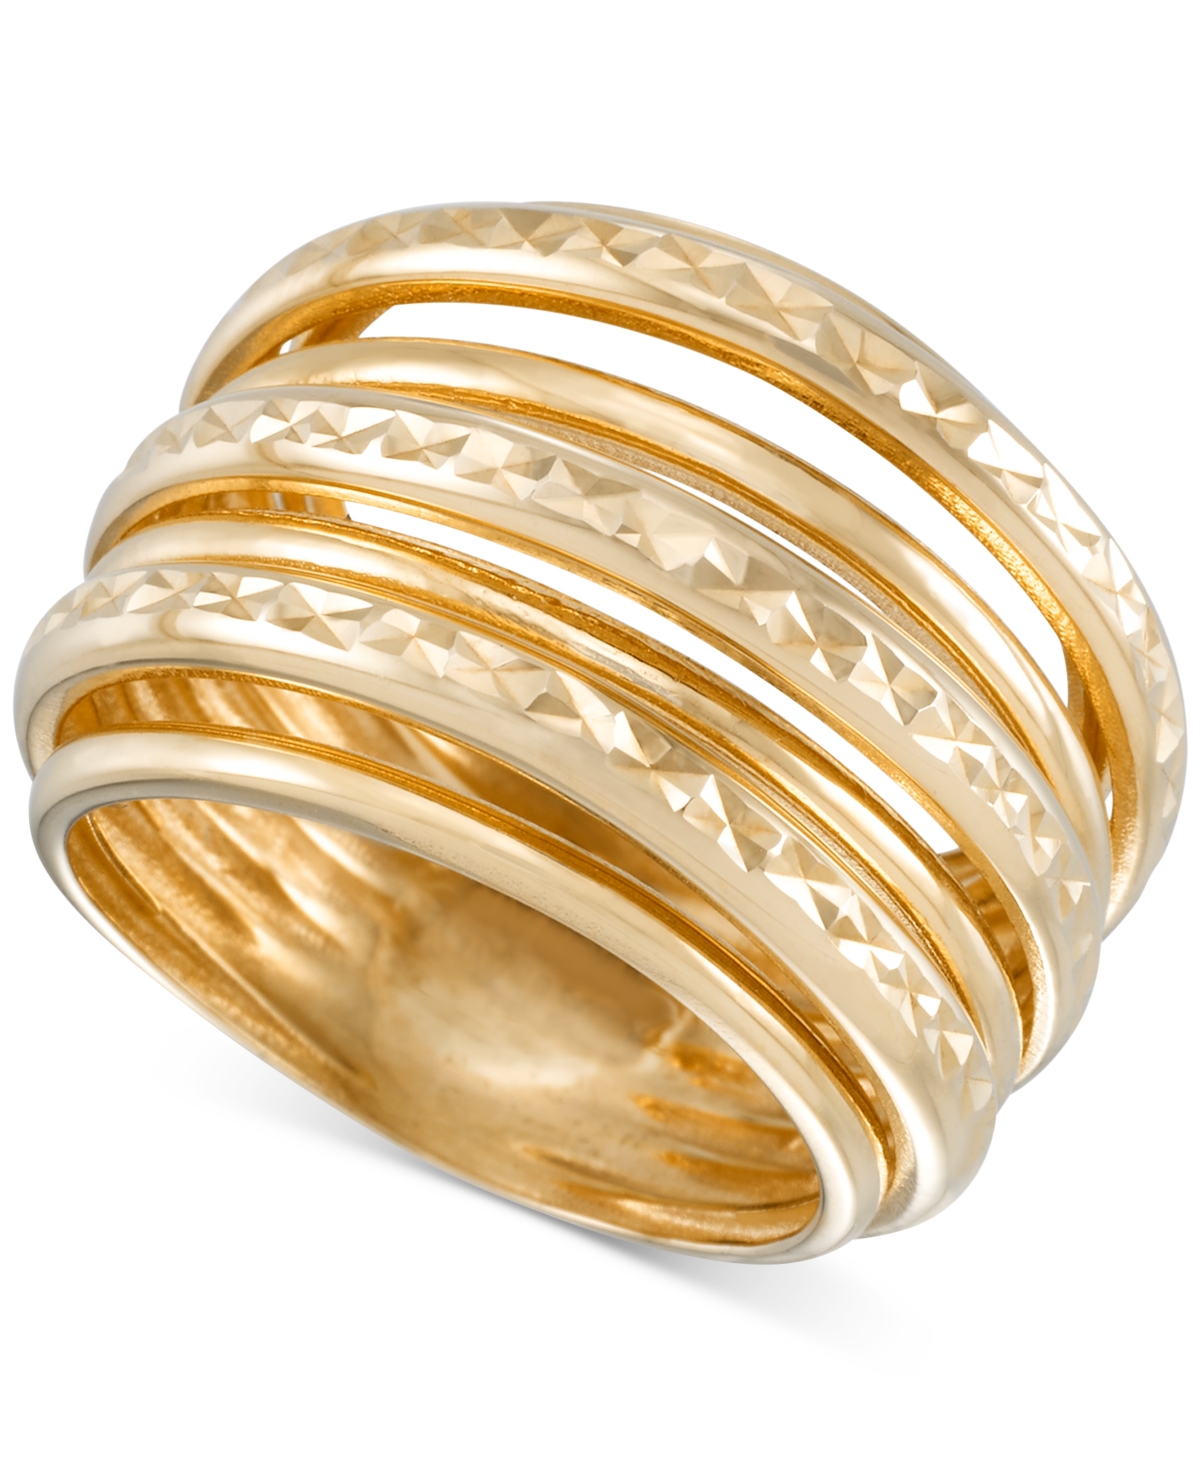 Polished & Textured Multirow Statement Ring in 10k Gold - Gold